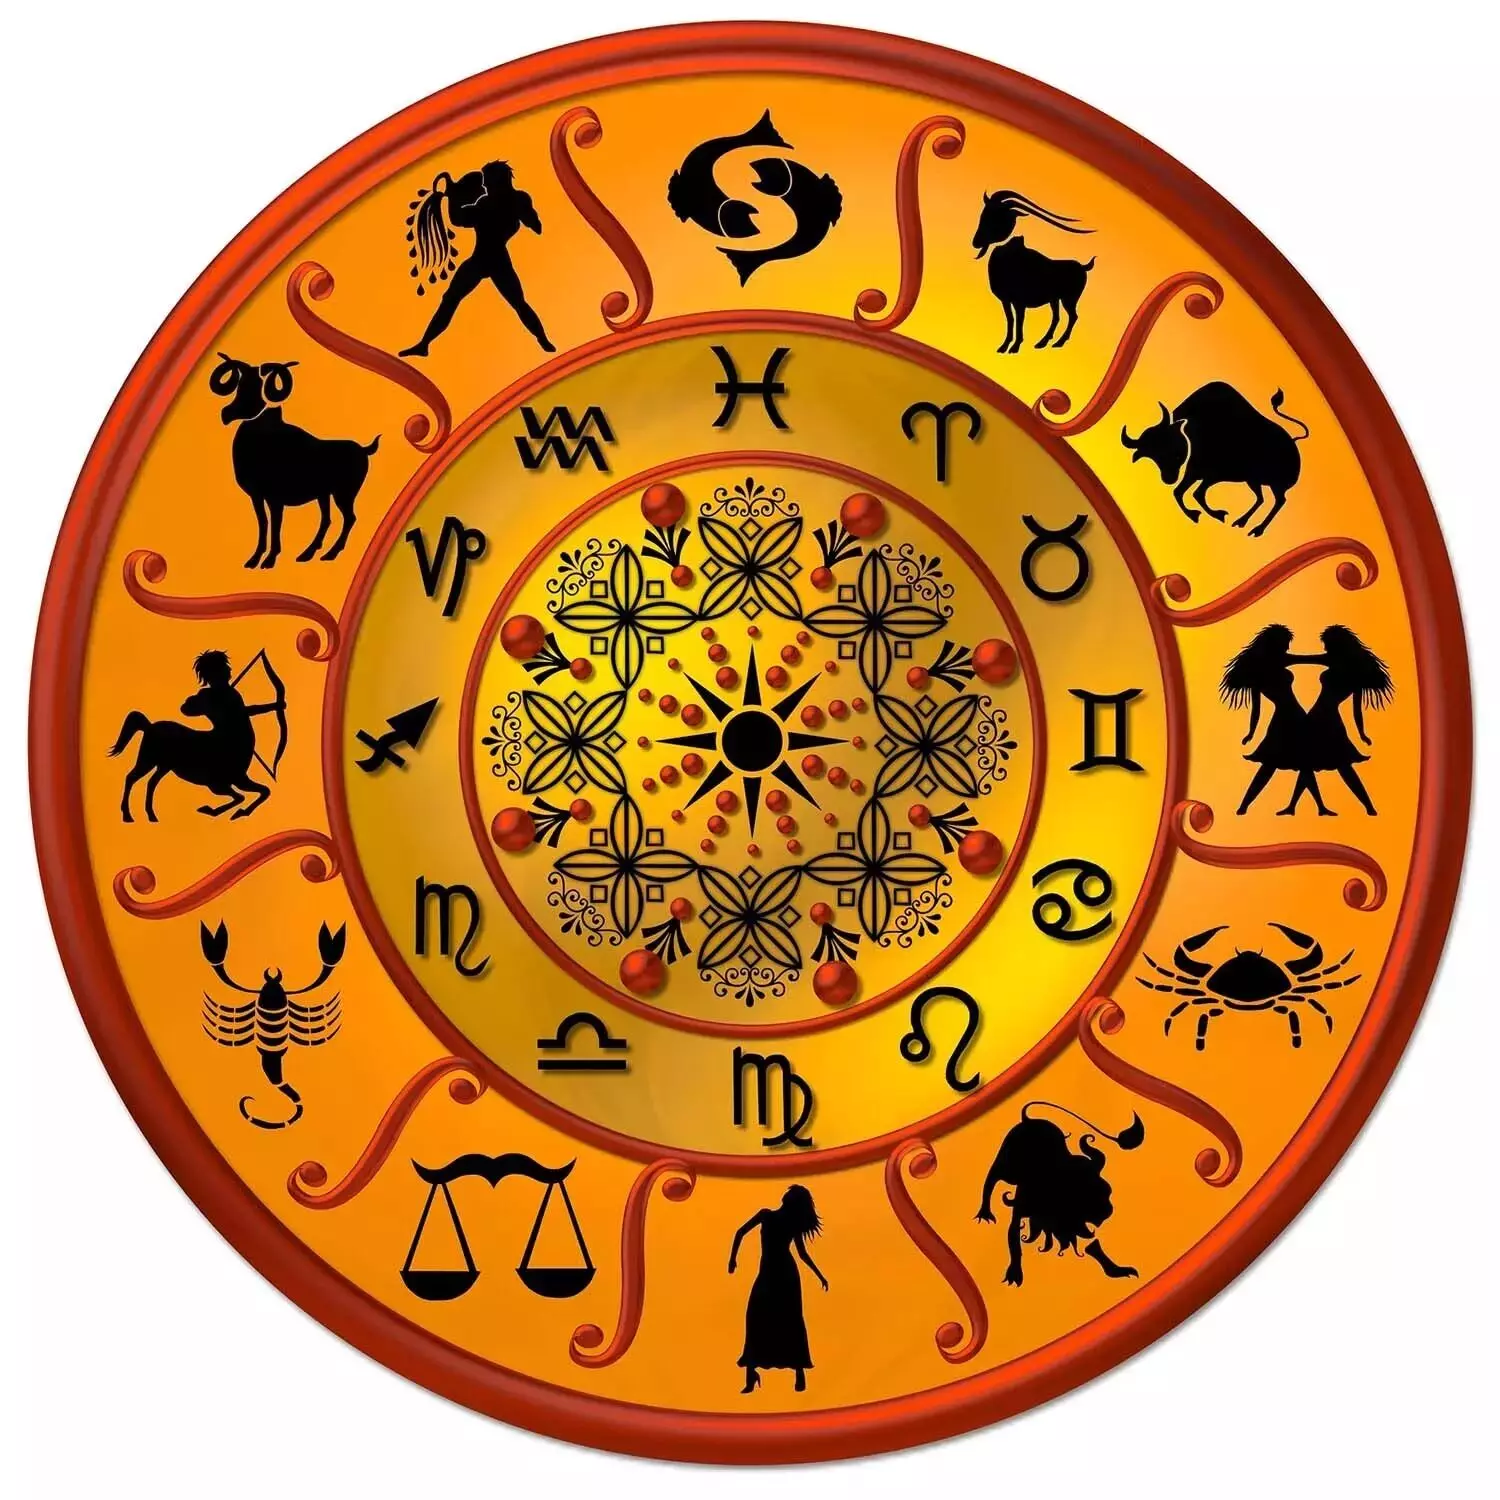 22 September  – Know your todays horoscope